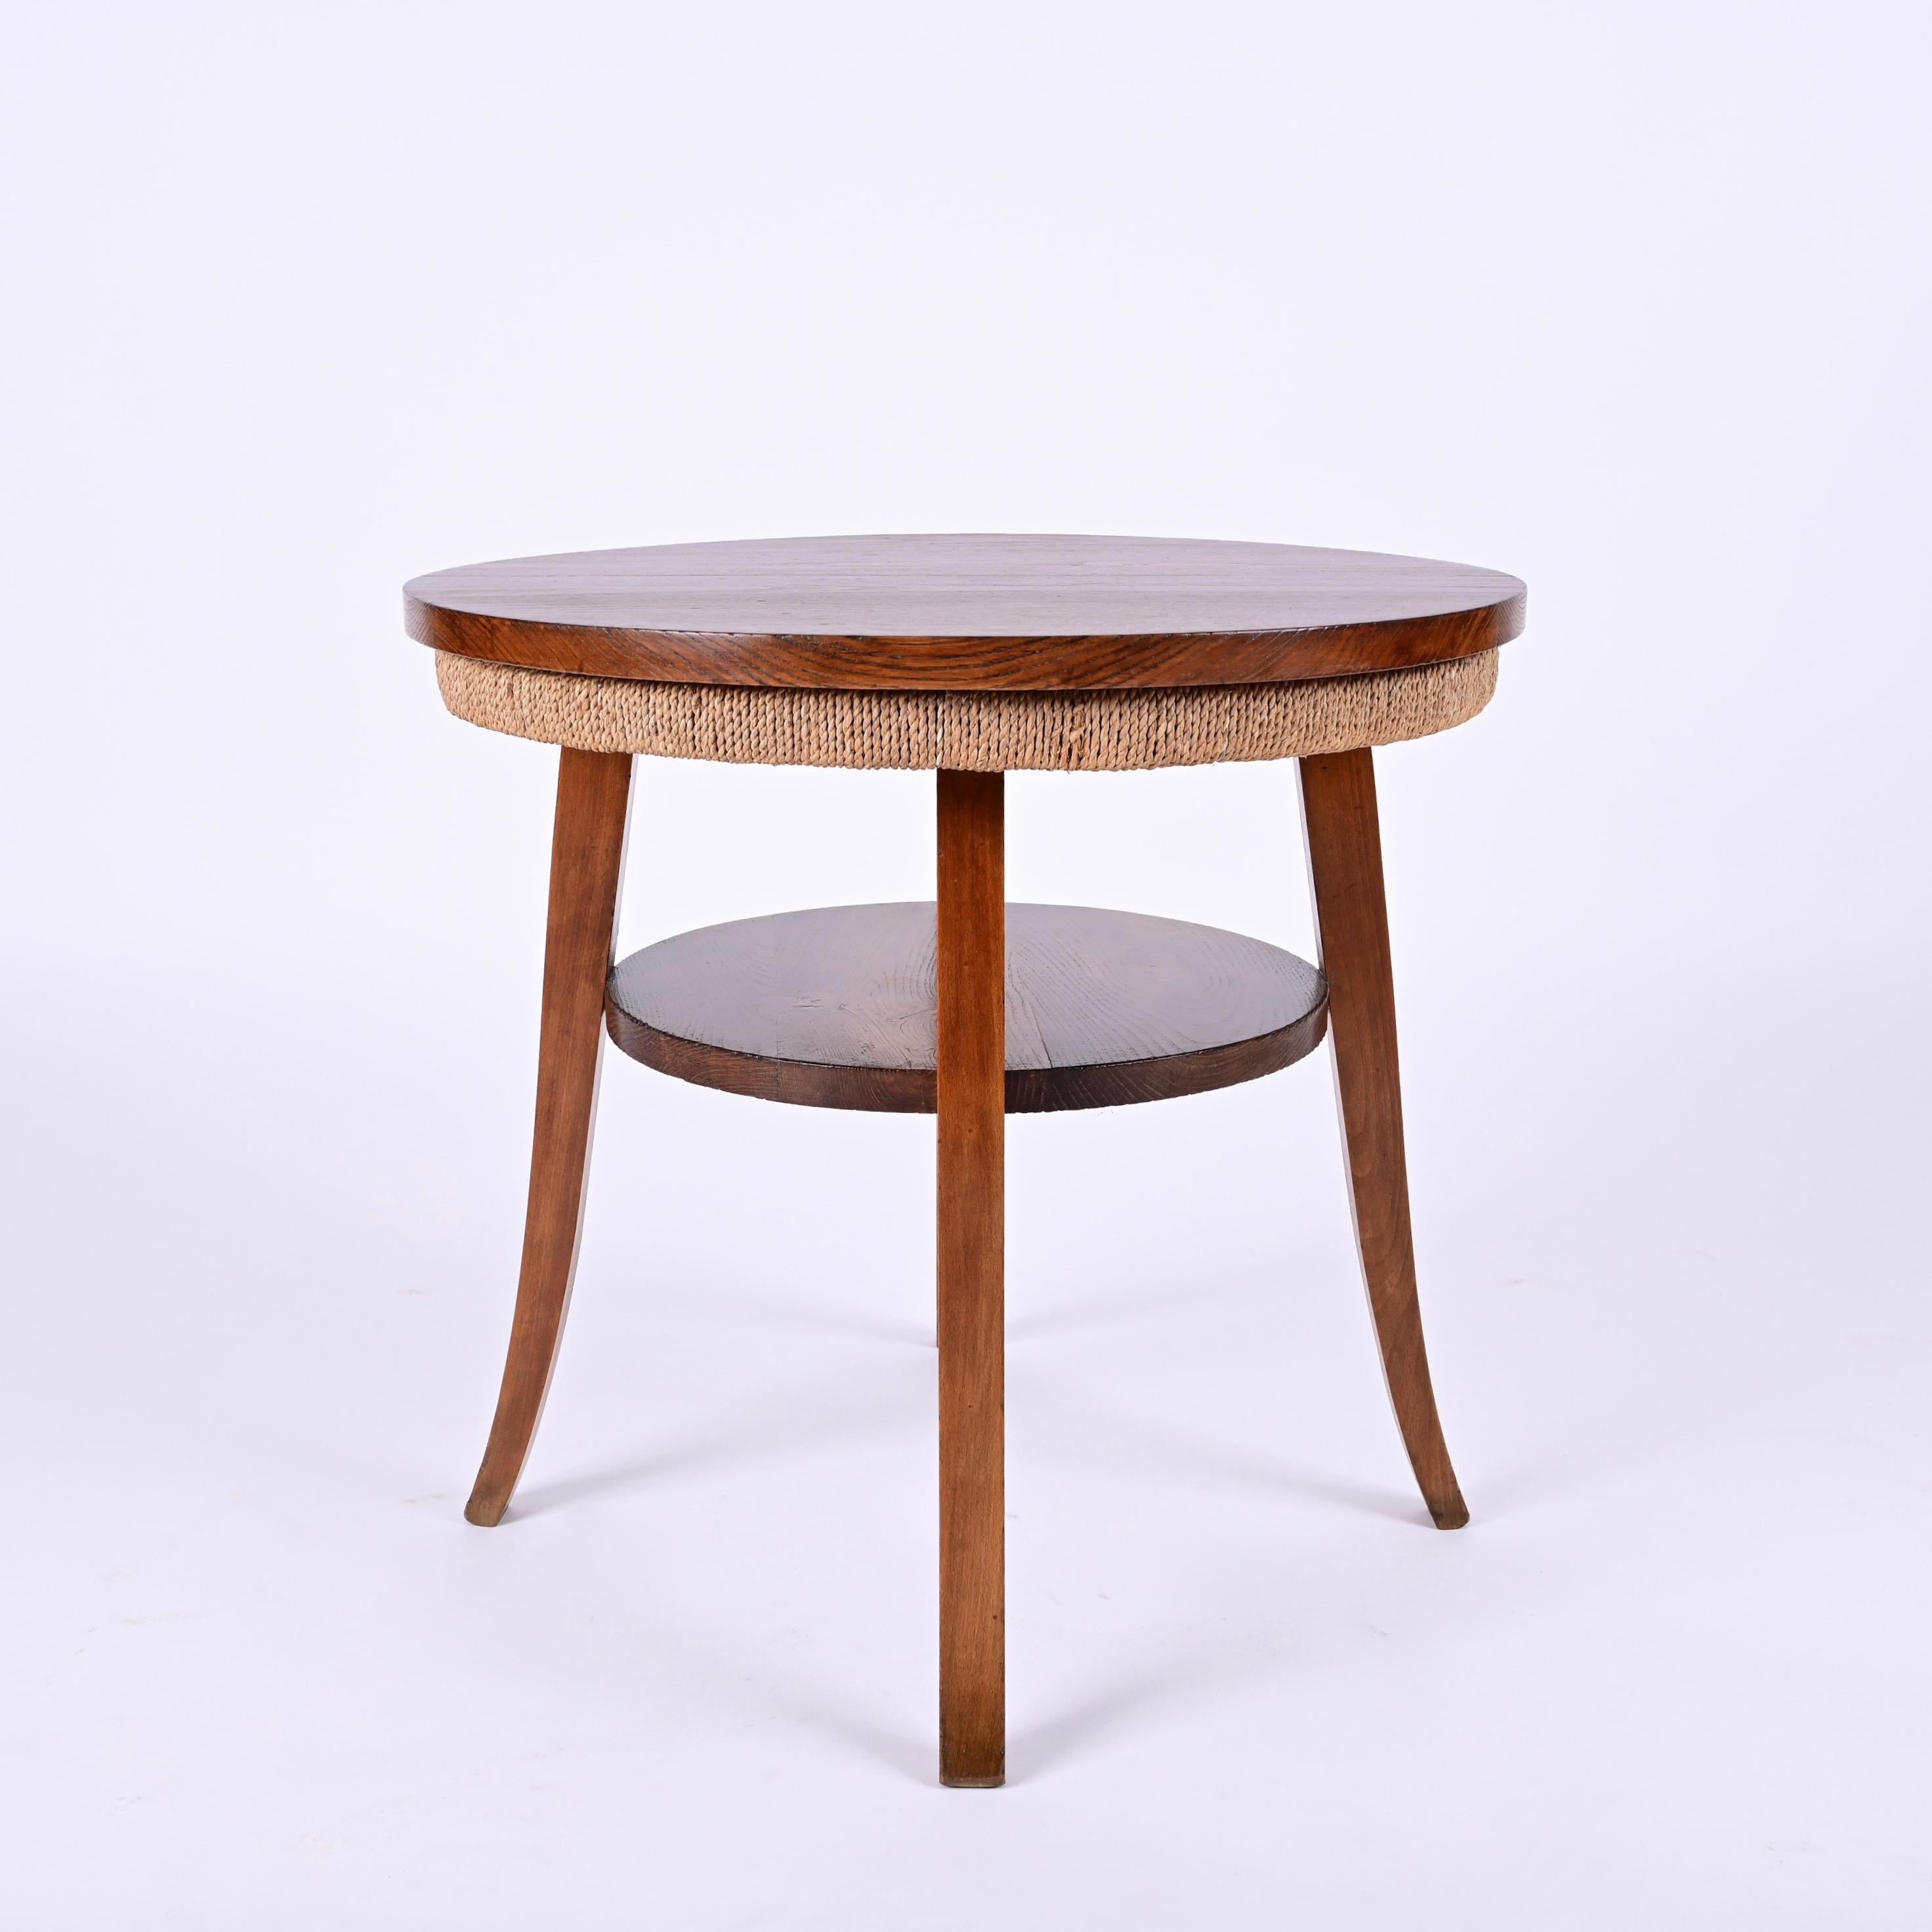 Midcentury Two-Tier Round Rope and Chestnut Wood Italian Coffee Table, 1950s For Sale 6